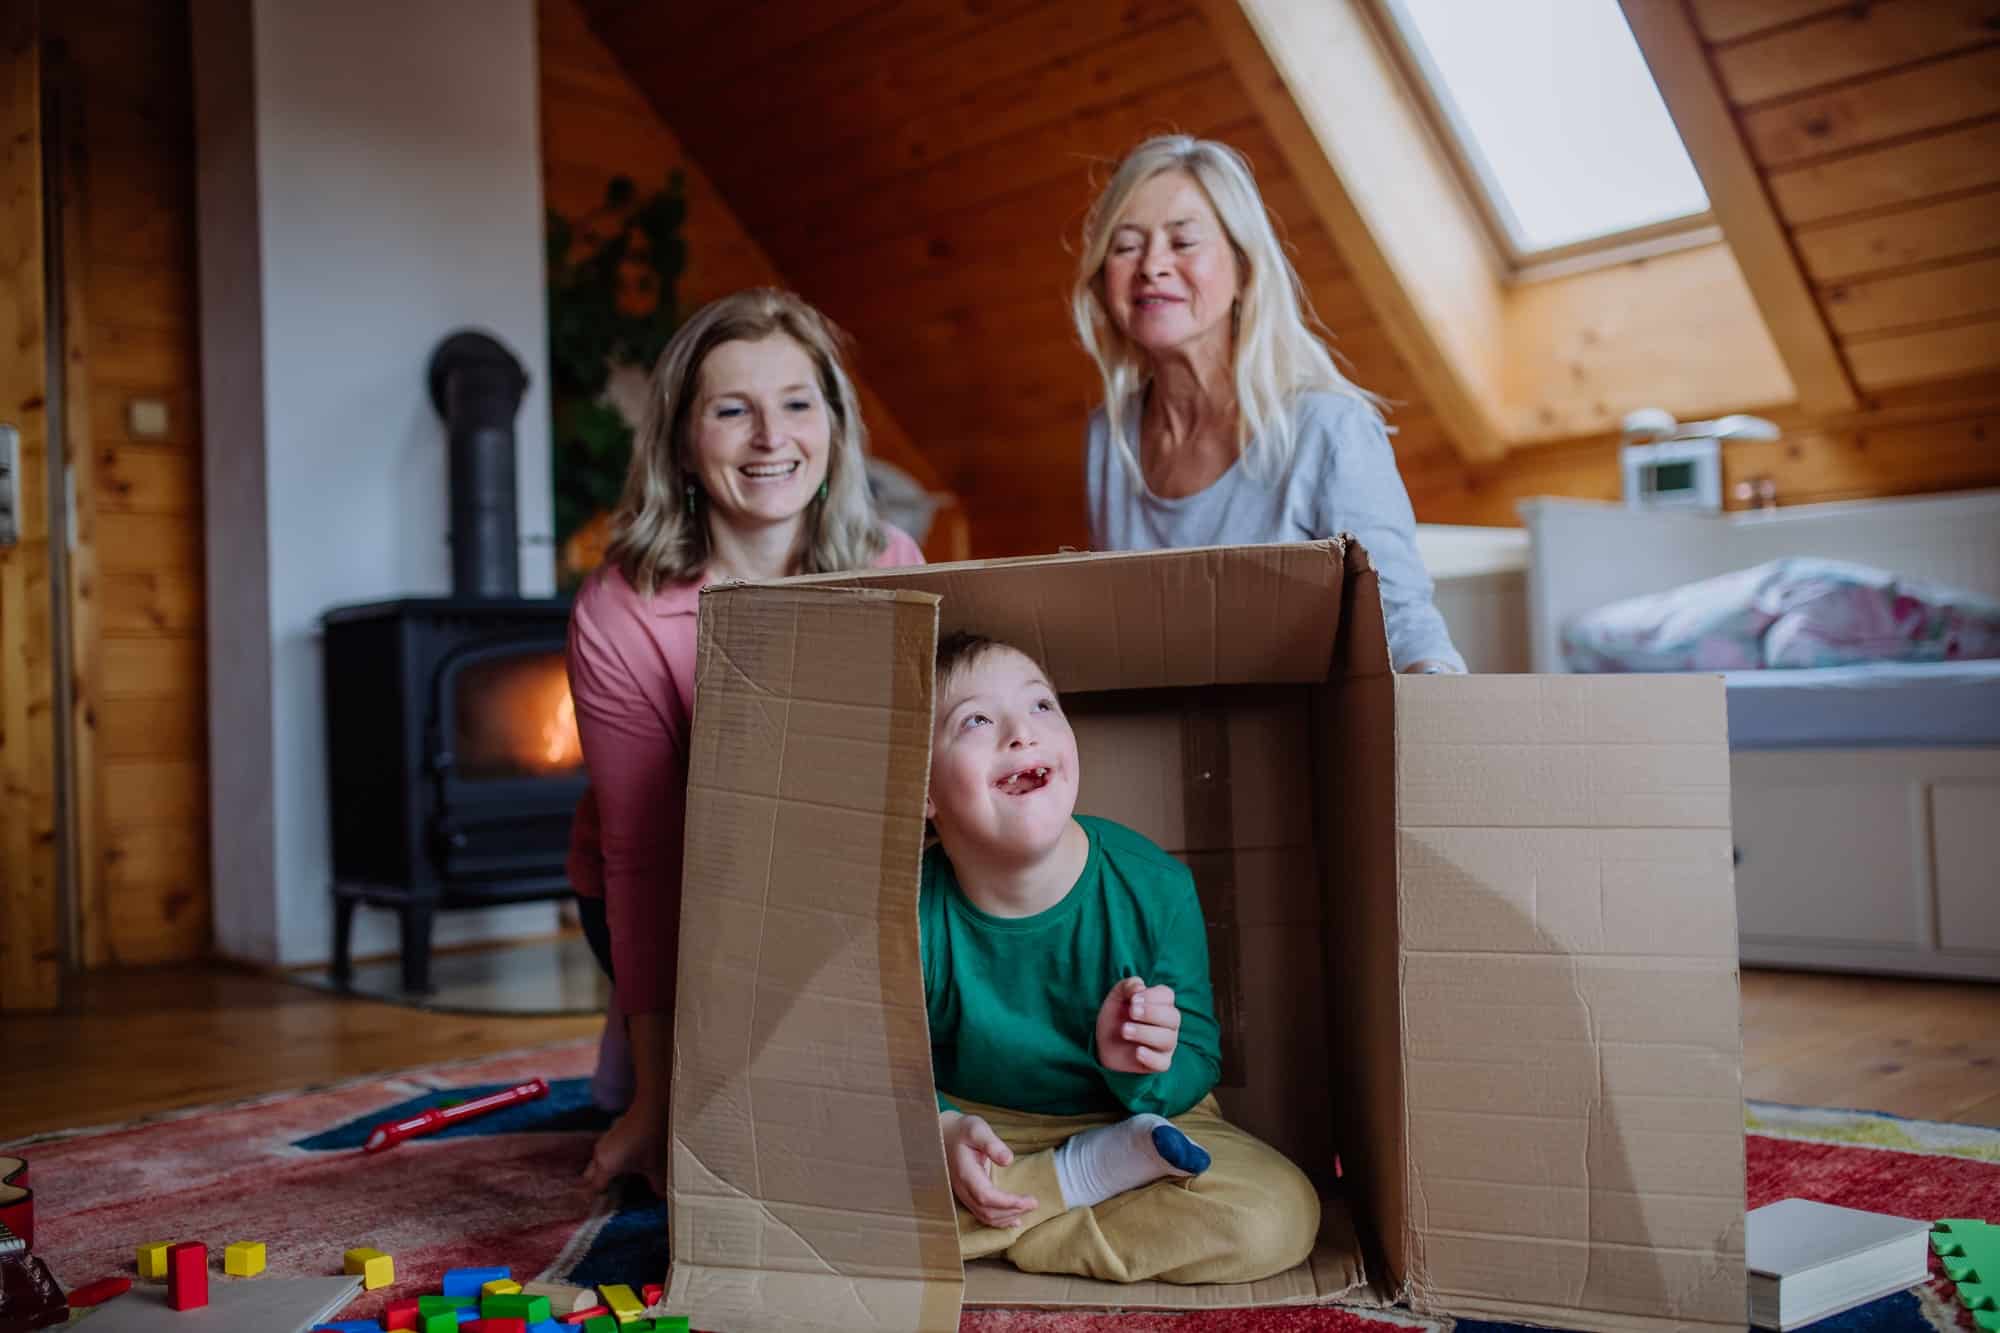 Boy with Down syndrome with his mother and grandmother playing with box together at home